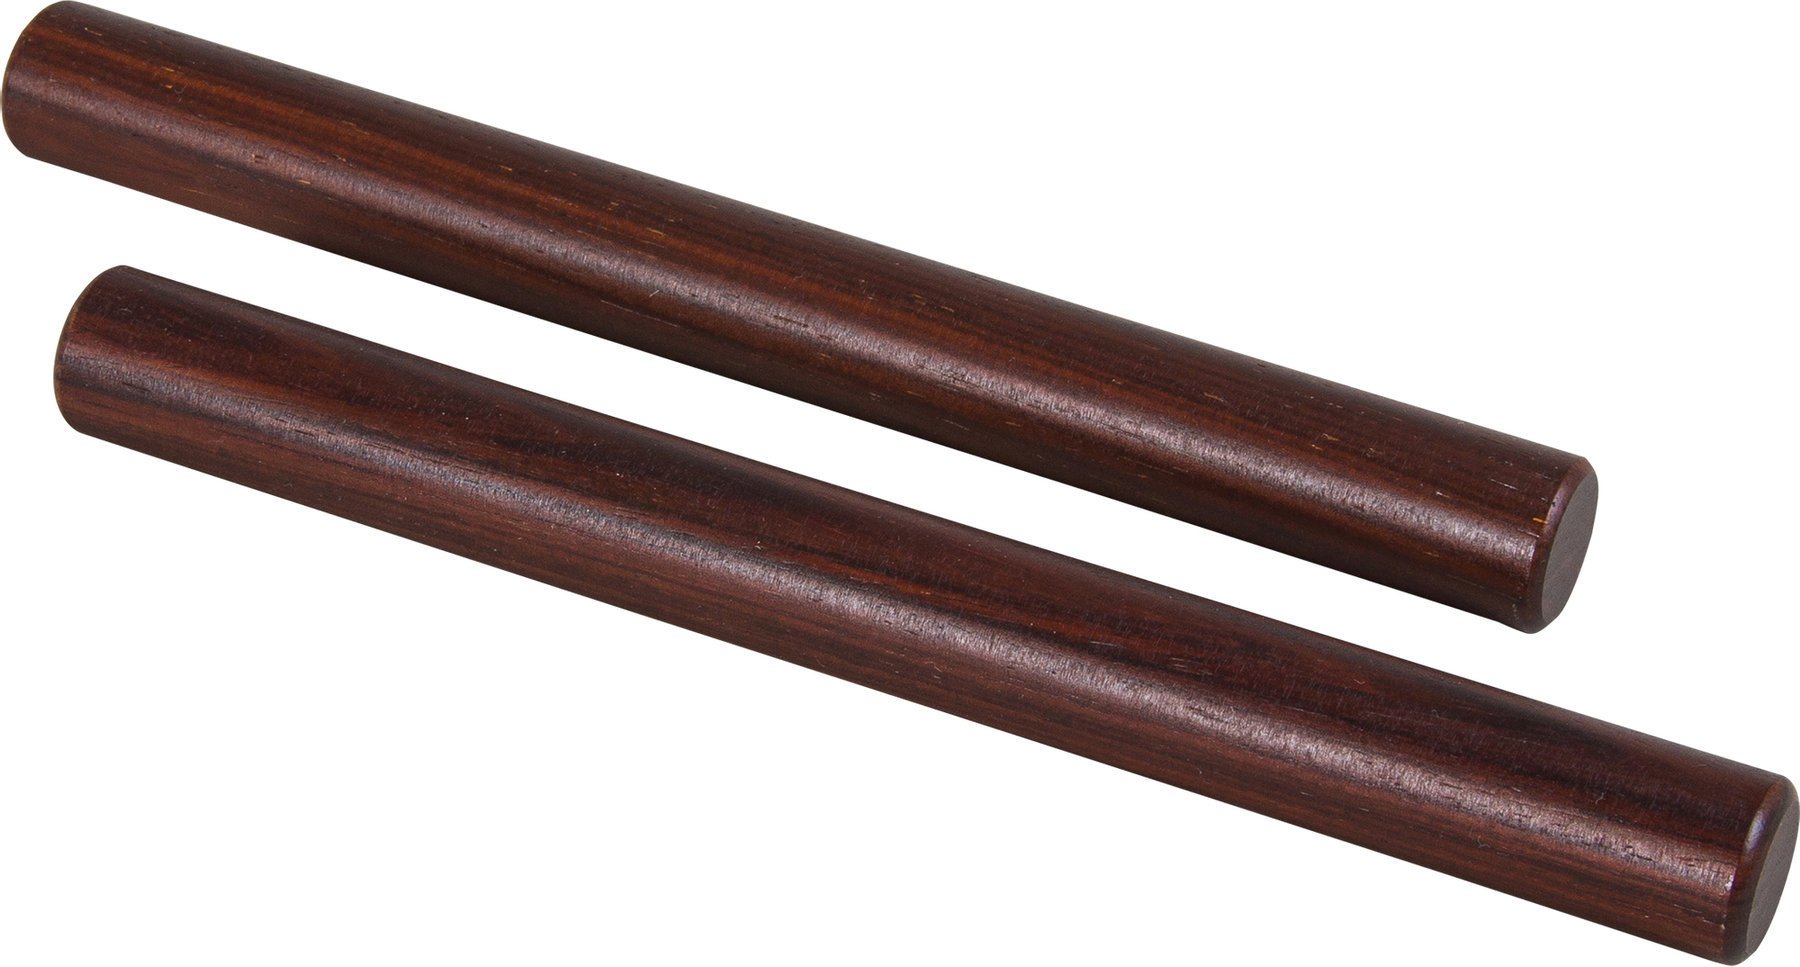 Claves Studio 49 S-18 Claves Rosewood